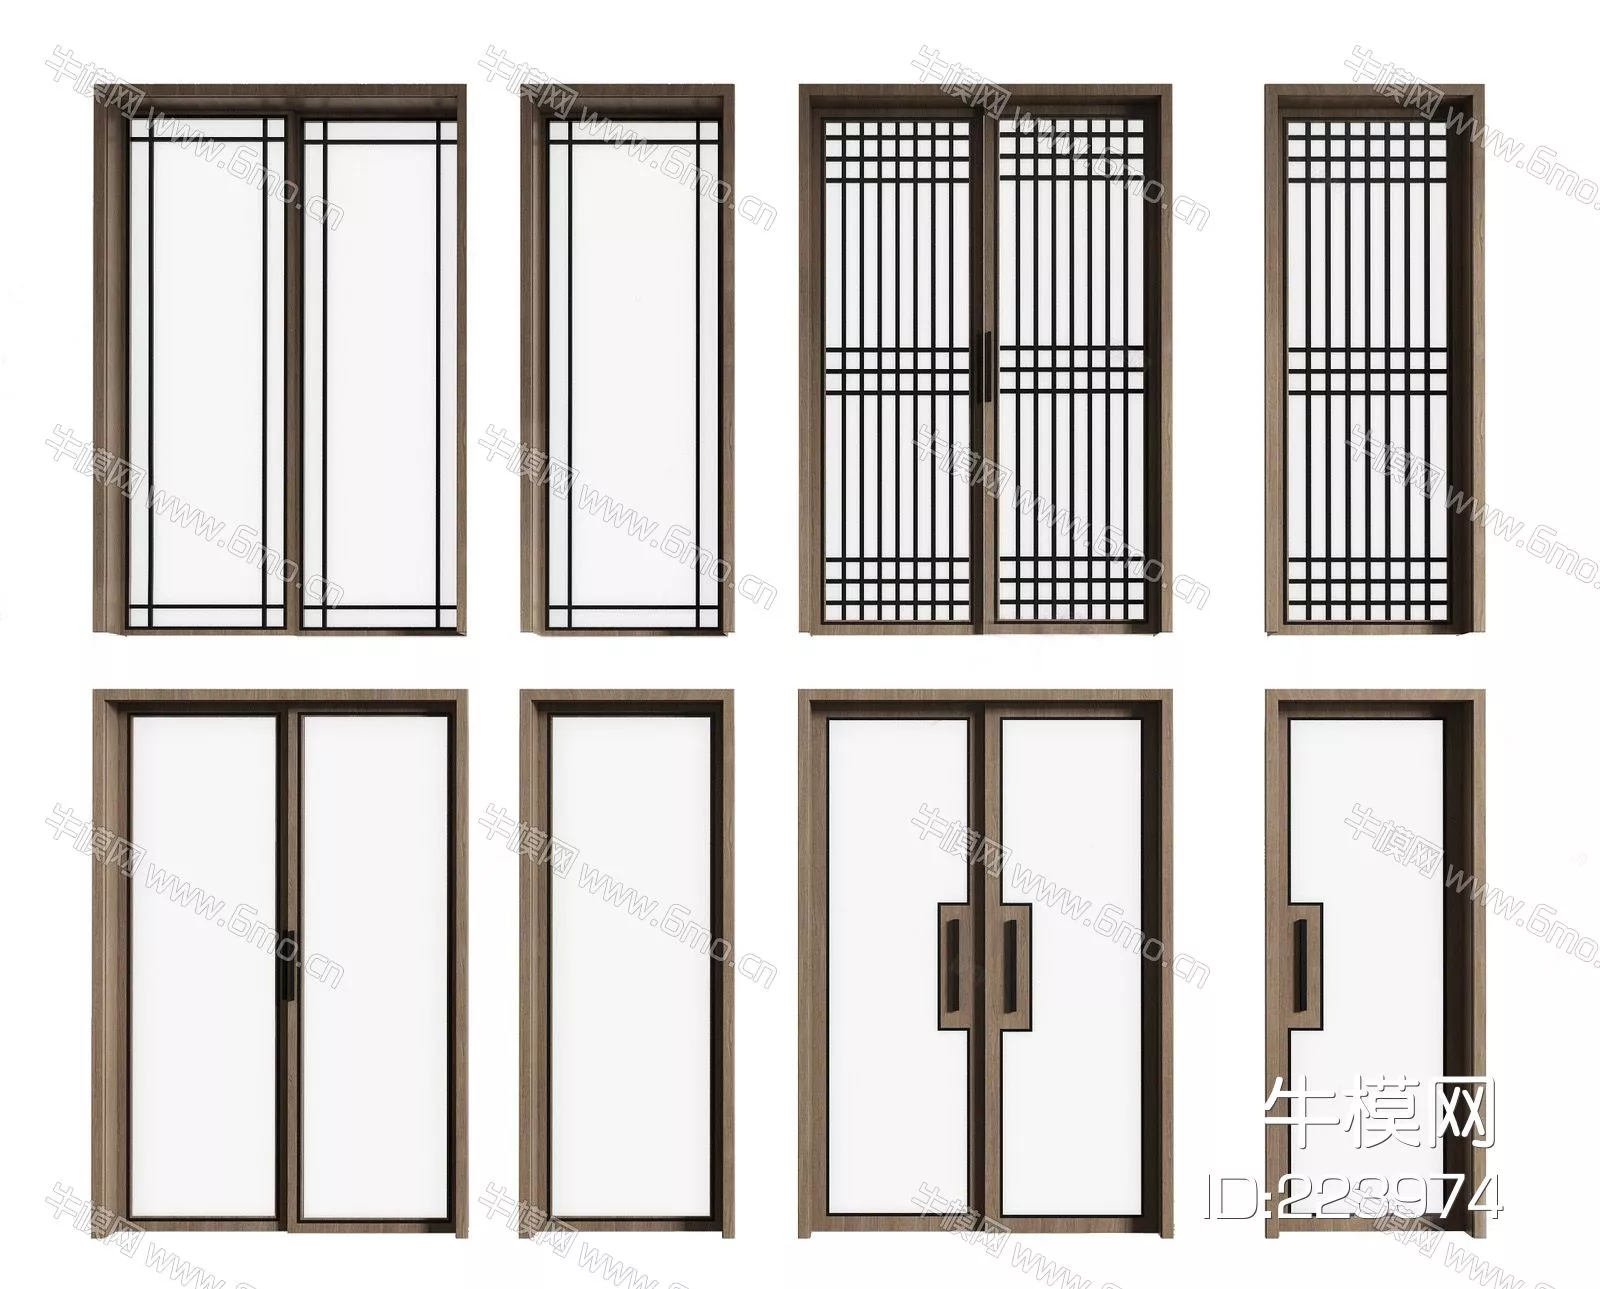 CHINESE DOOR AND WINDOWS - SKETCHUP 3D MODEL - ENSCAPE - 223974